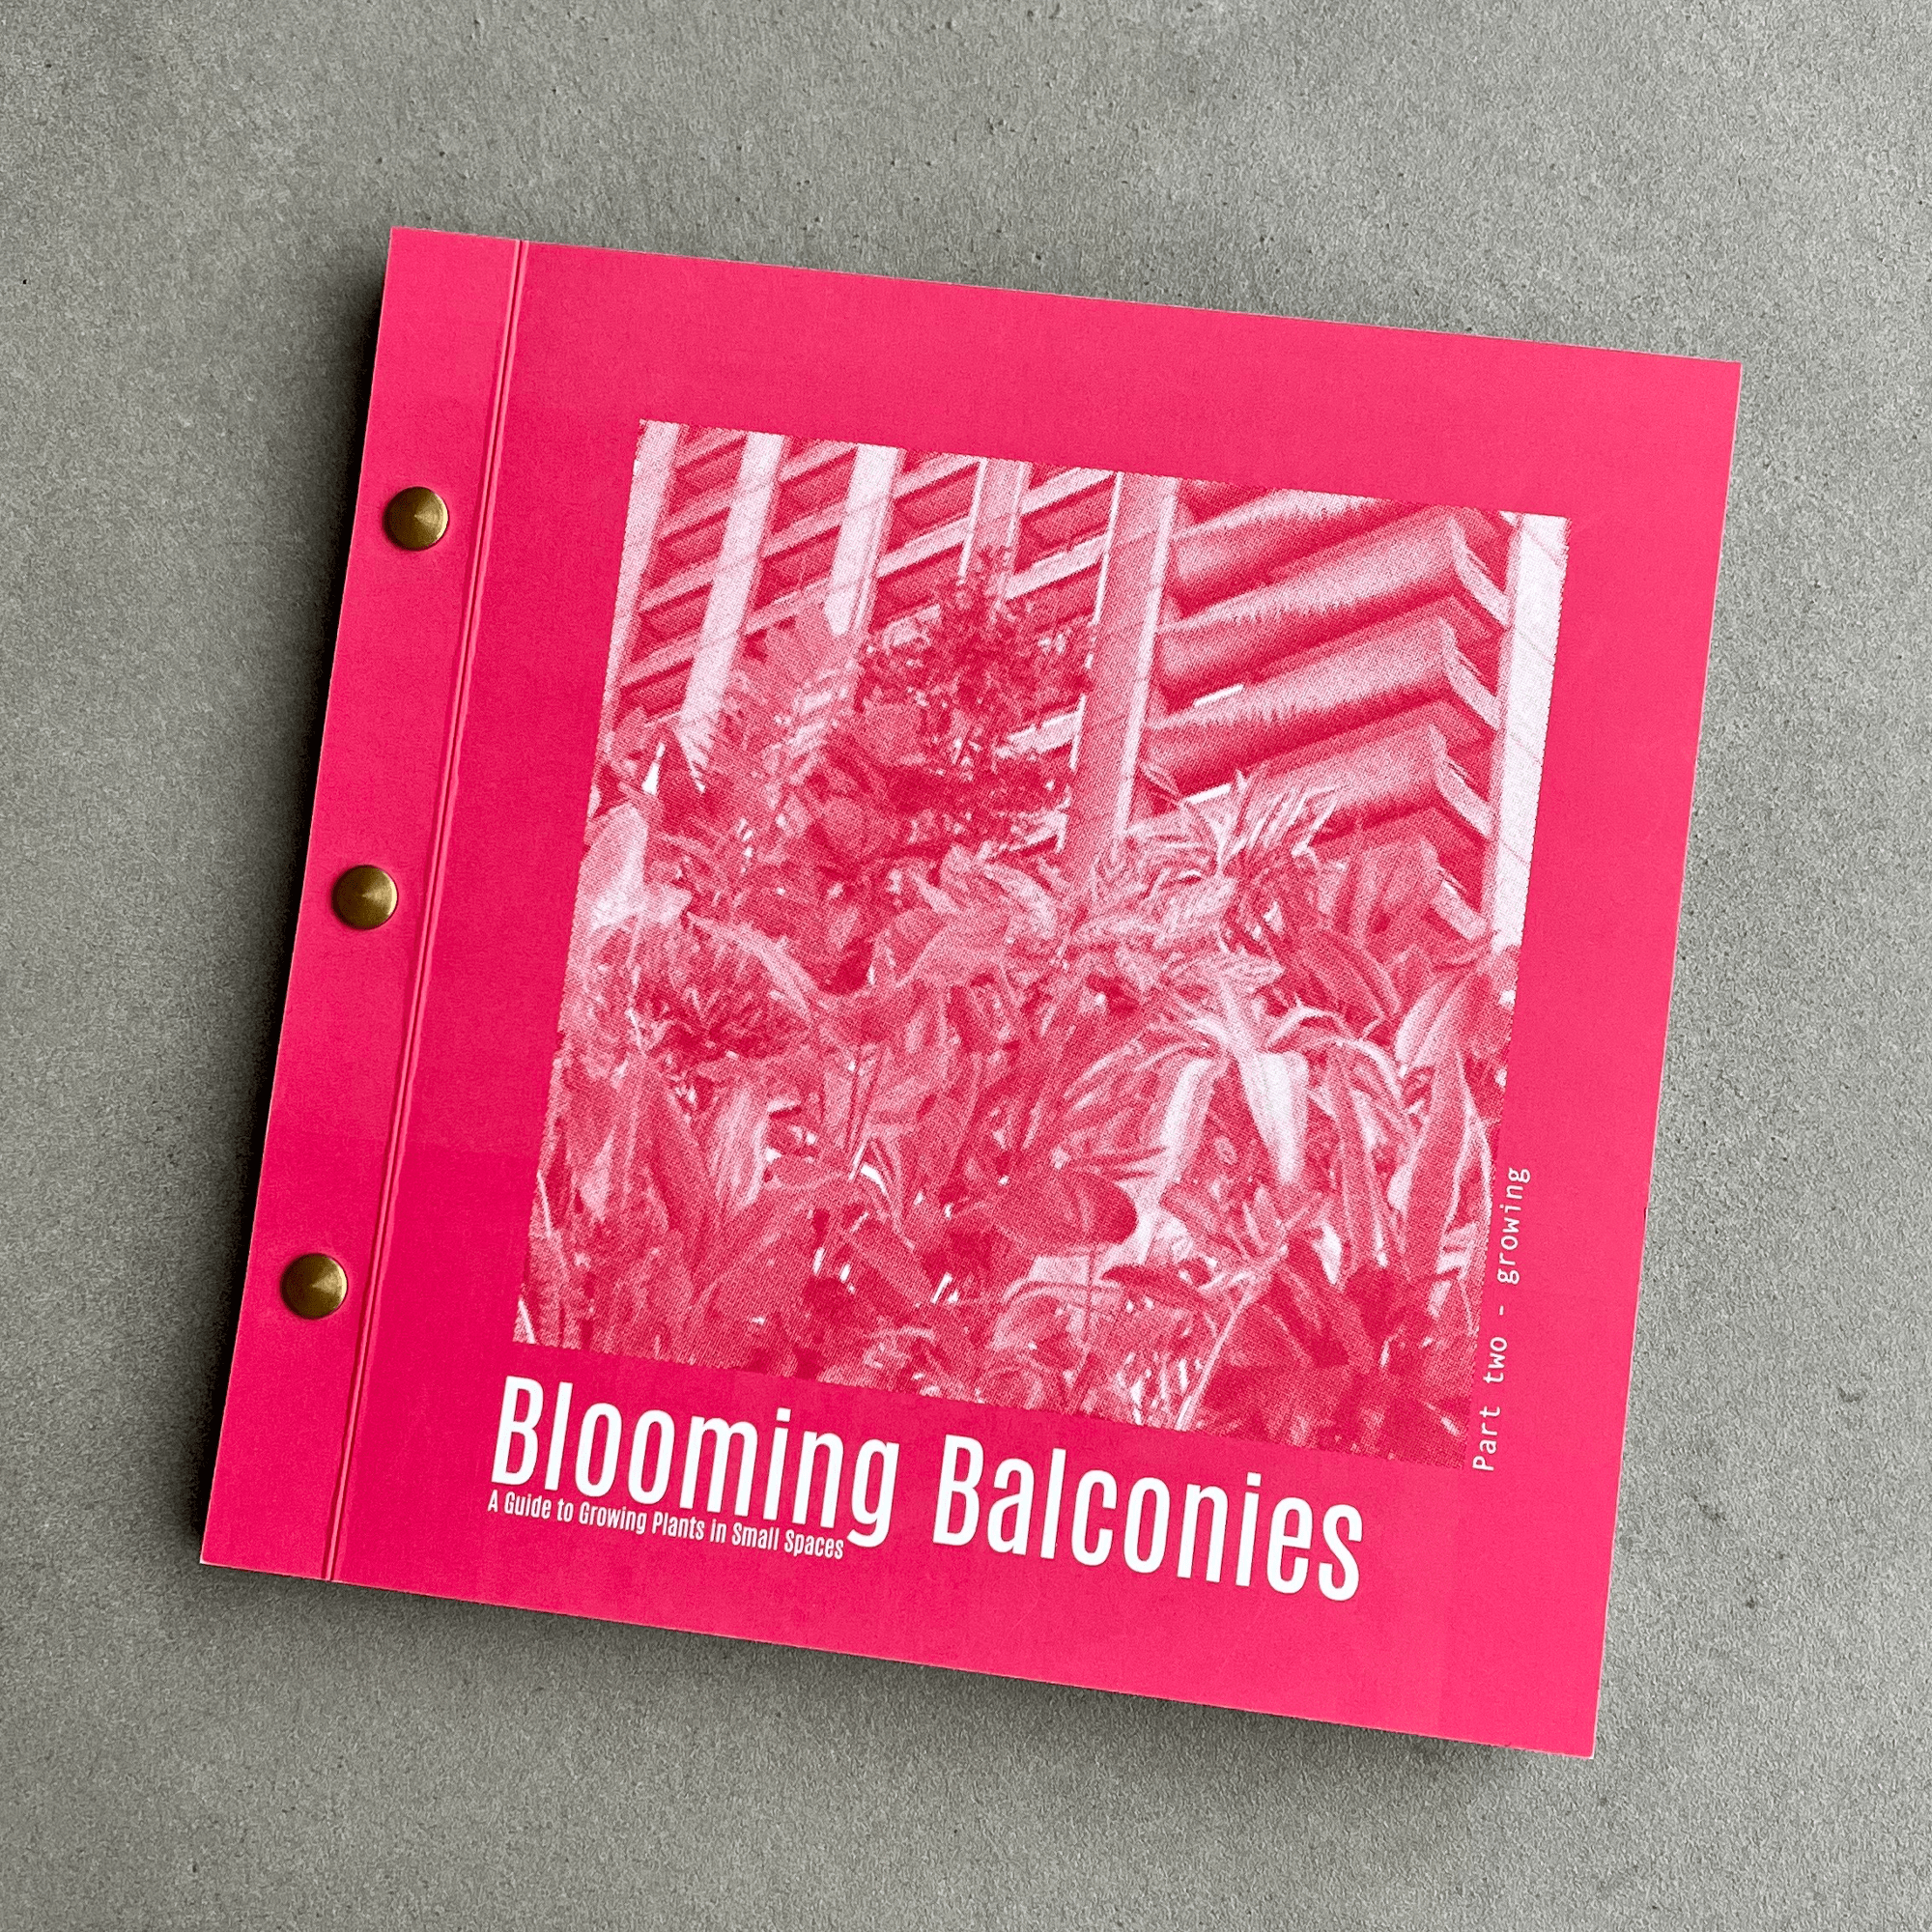 A closed bright pink book with a tower block and flowers as the cover photo. It has text which reads "Blooming Balconies" on.